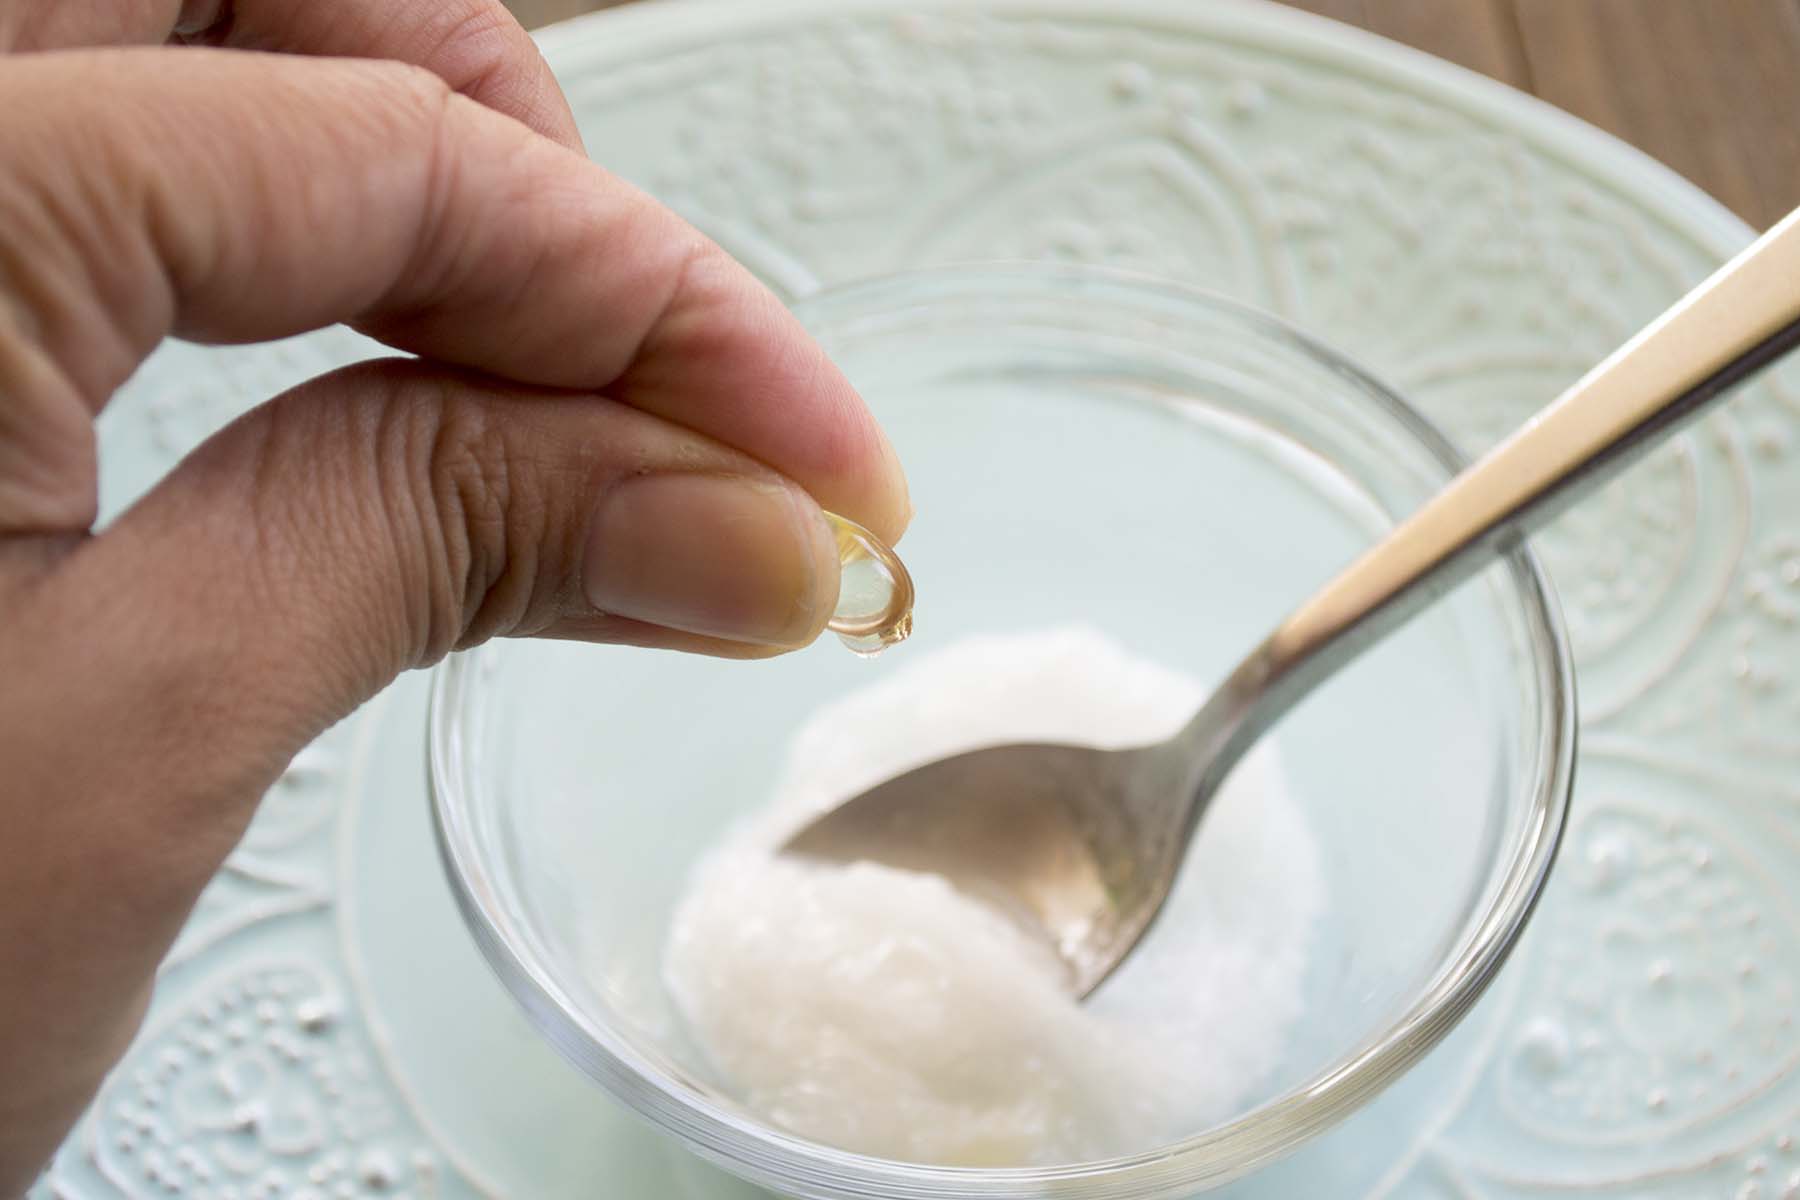 How To Make An Anti-Aging Coconut Oil Eye Cream